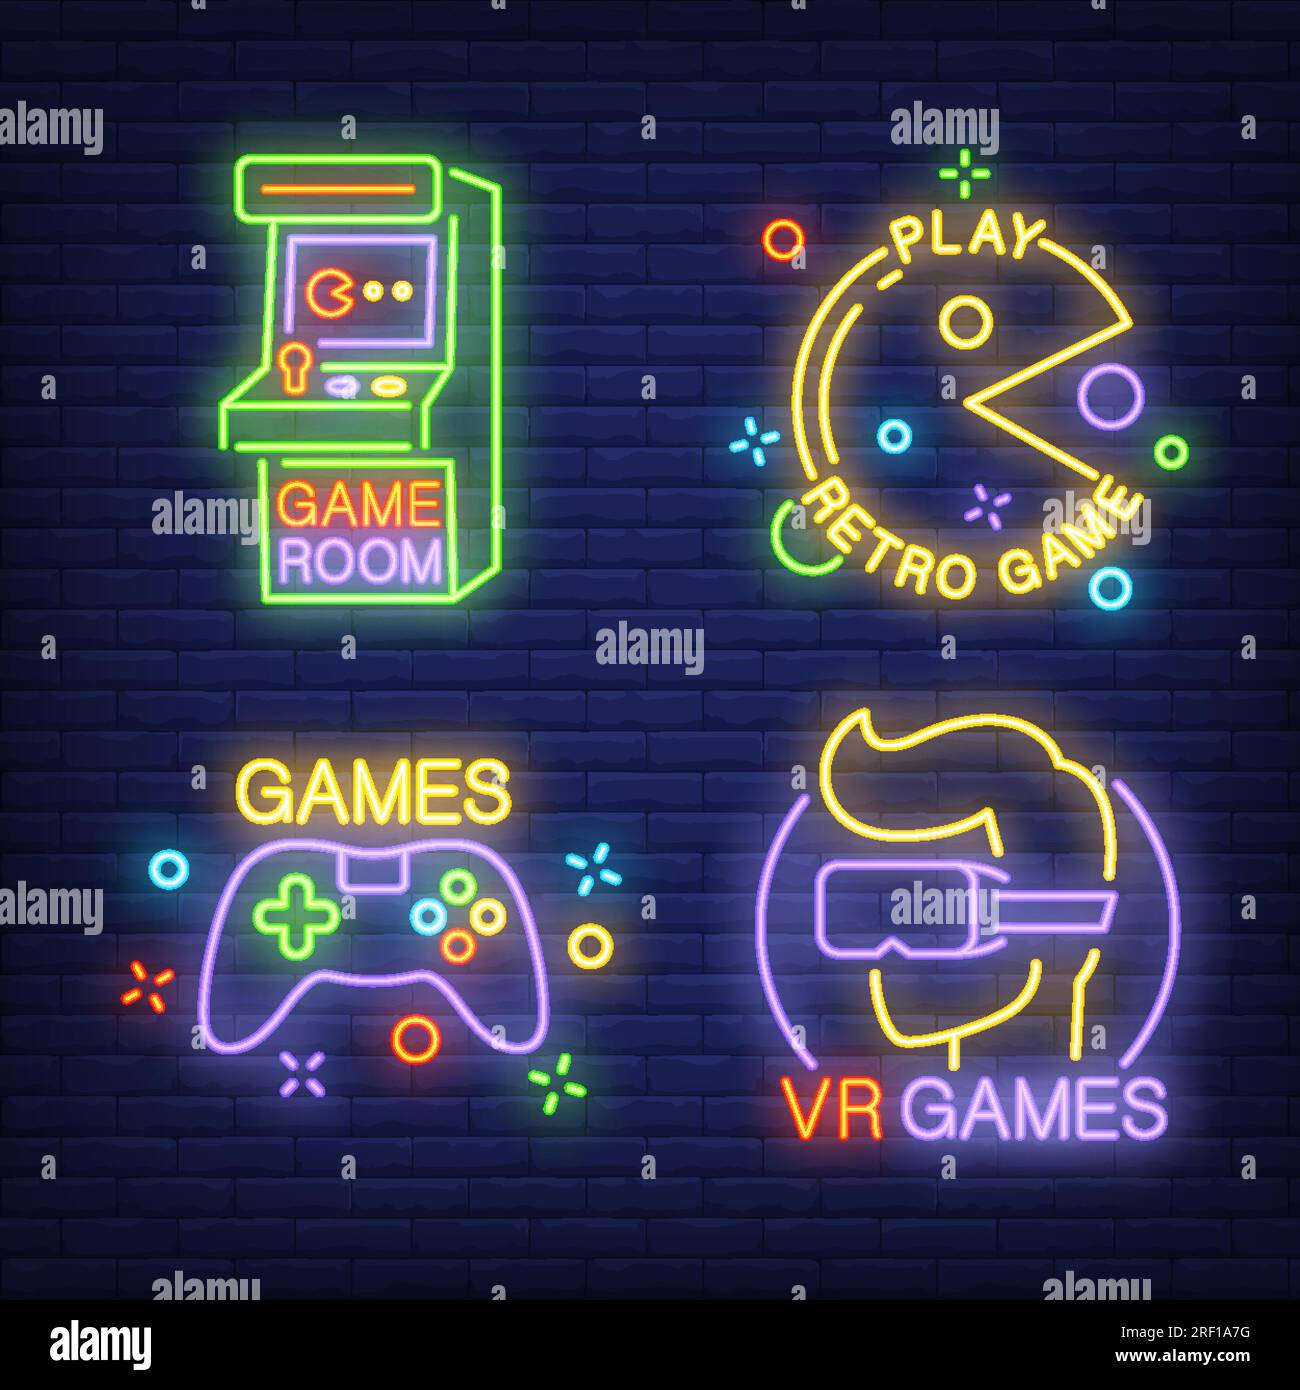 Retro game neon sign. Video games night light symbol, glowing gamer poster,  gaming club banner. Vector retro neon flyer icon Stock Vector